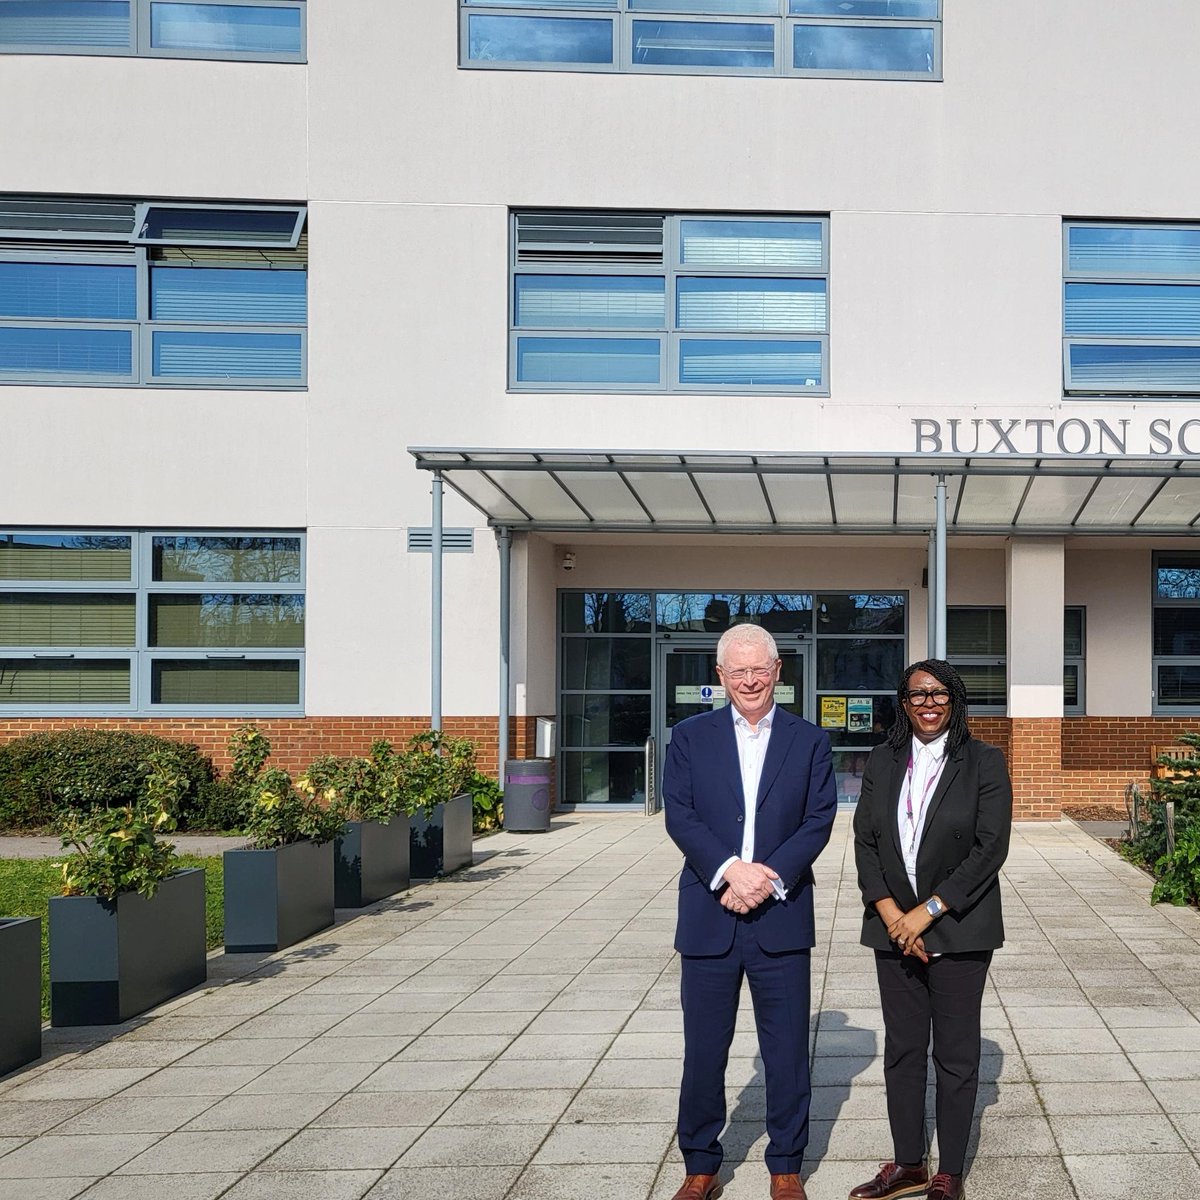 It was a real pleasure to visit @BuxtonSchInfo last Friday, meeting their lovely Head Jackie Bowers-Broadbent, staff and students.